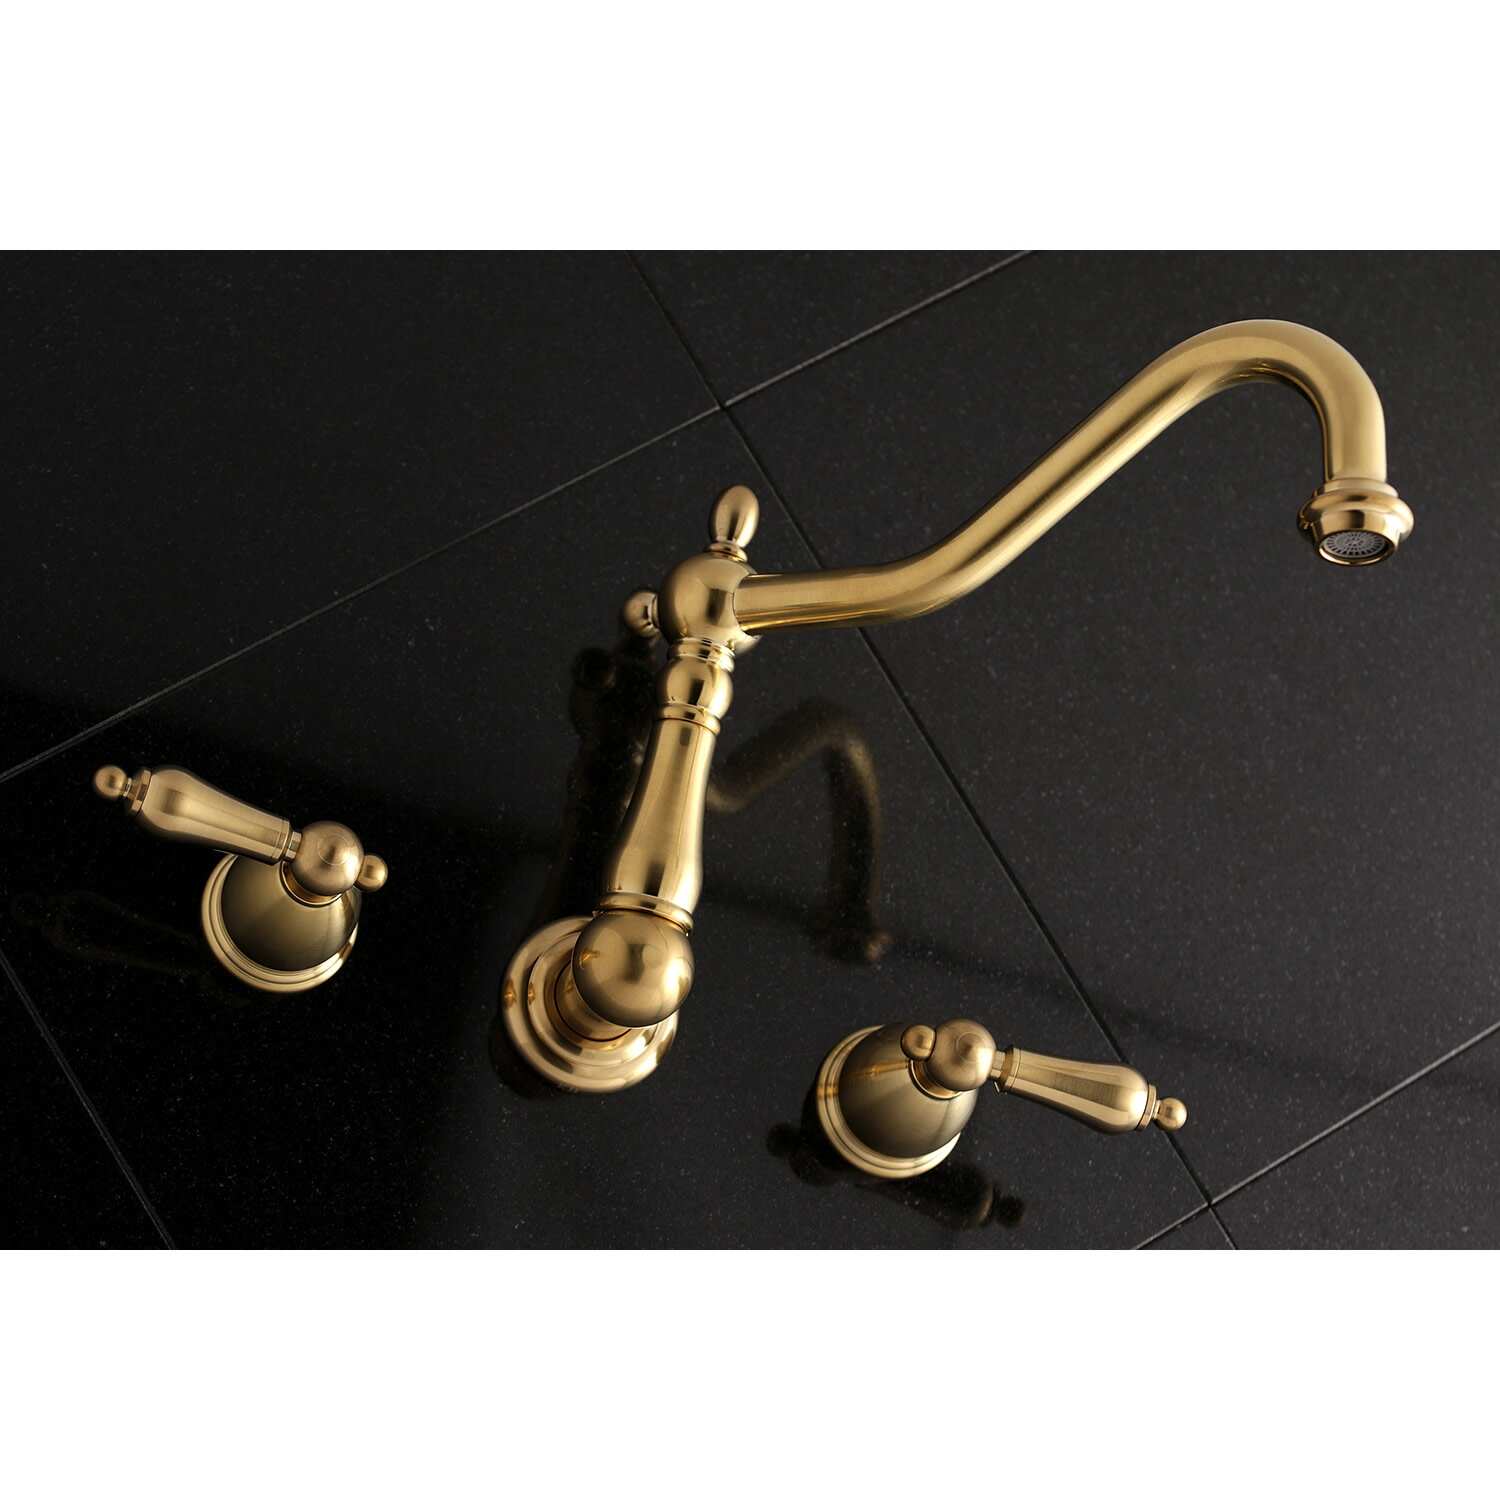 Heritage 3-Hole Wall Mount Roman Tub Faucet